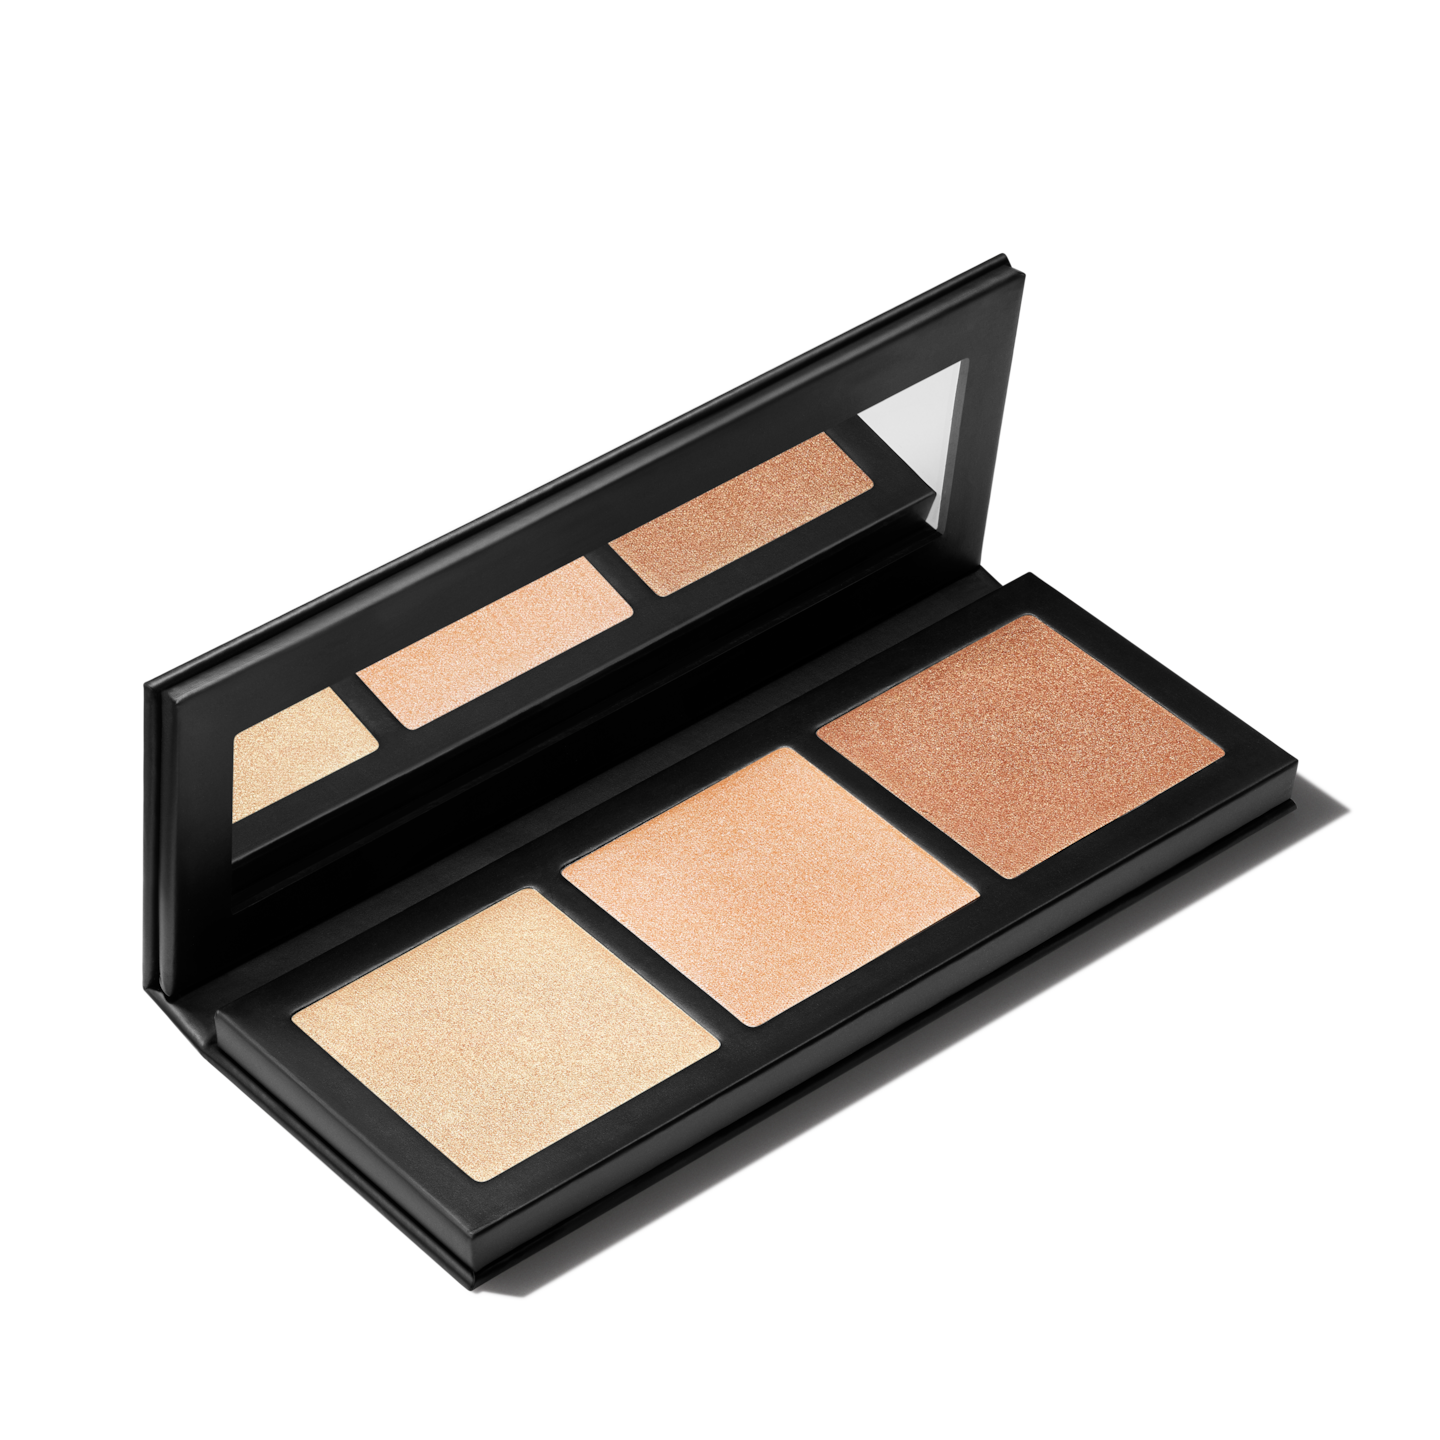 prøve fred eksistens Hyper Real Glow Palette: Get It Glowin' | M∙A∙C Cosmetics | MAC Cosmetics -  Official Site